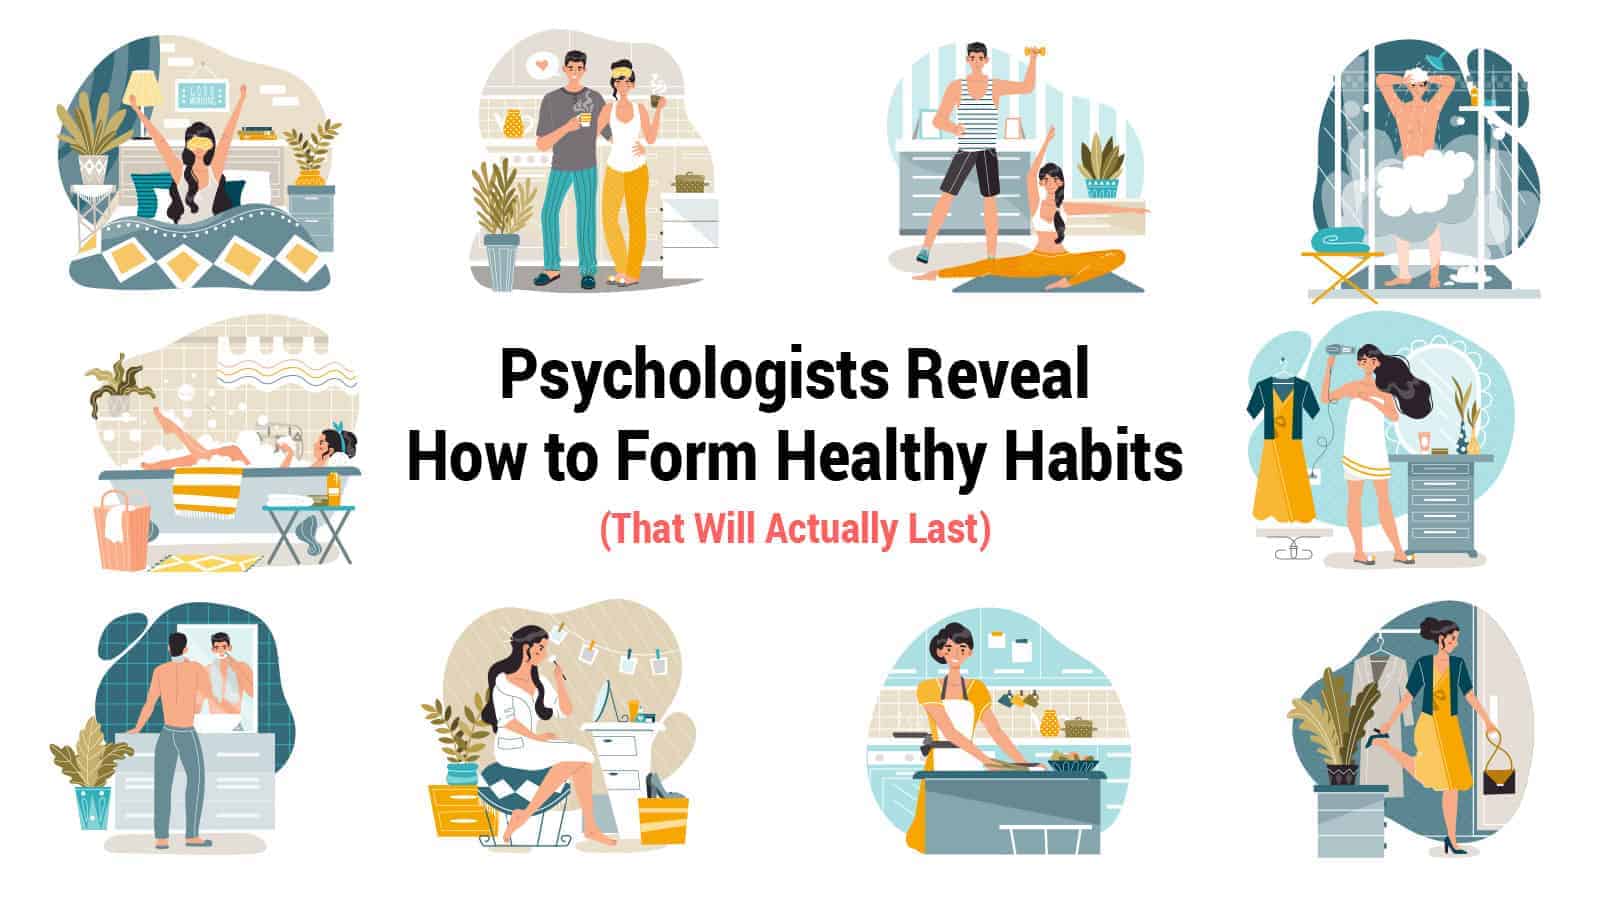 Psychologists Reveal How to Form Healthy Habits (That Will Actually Last)